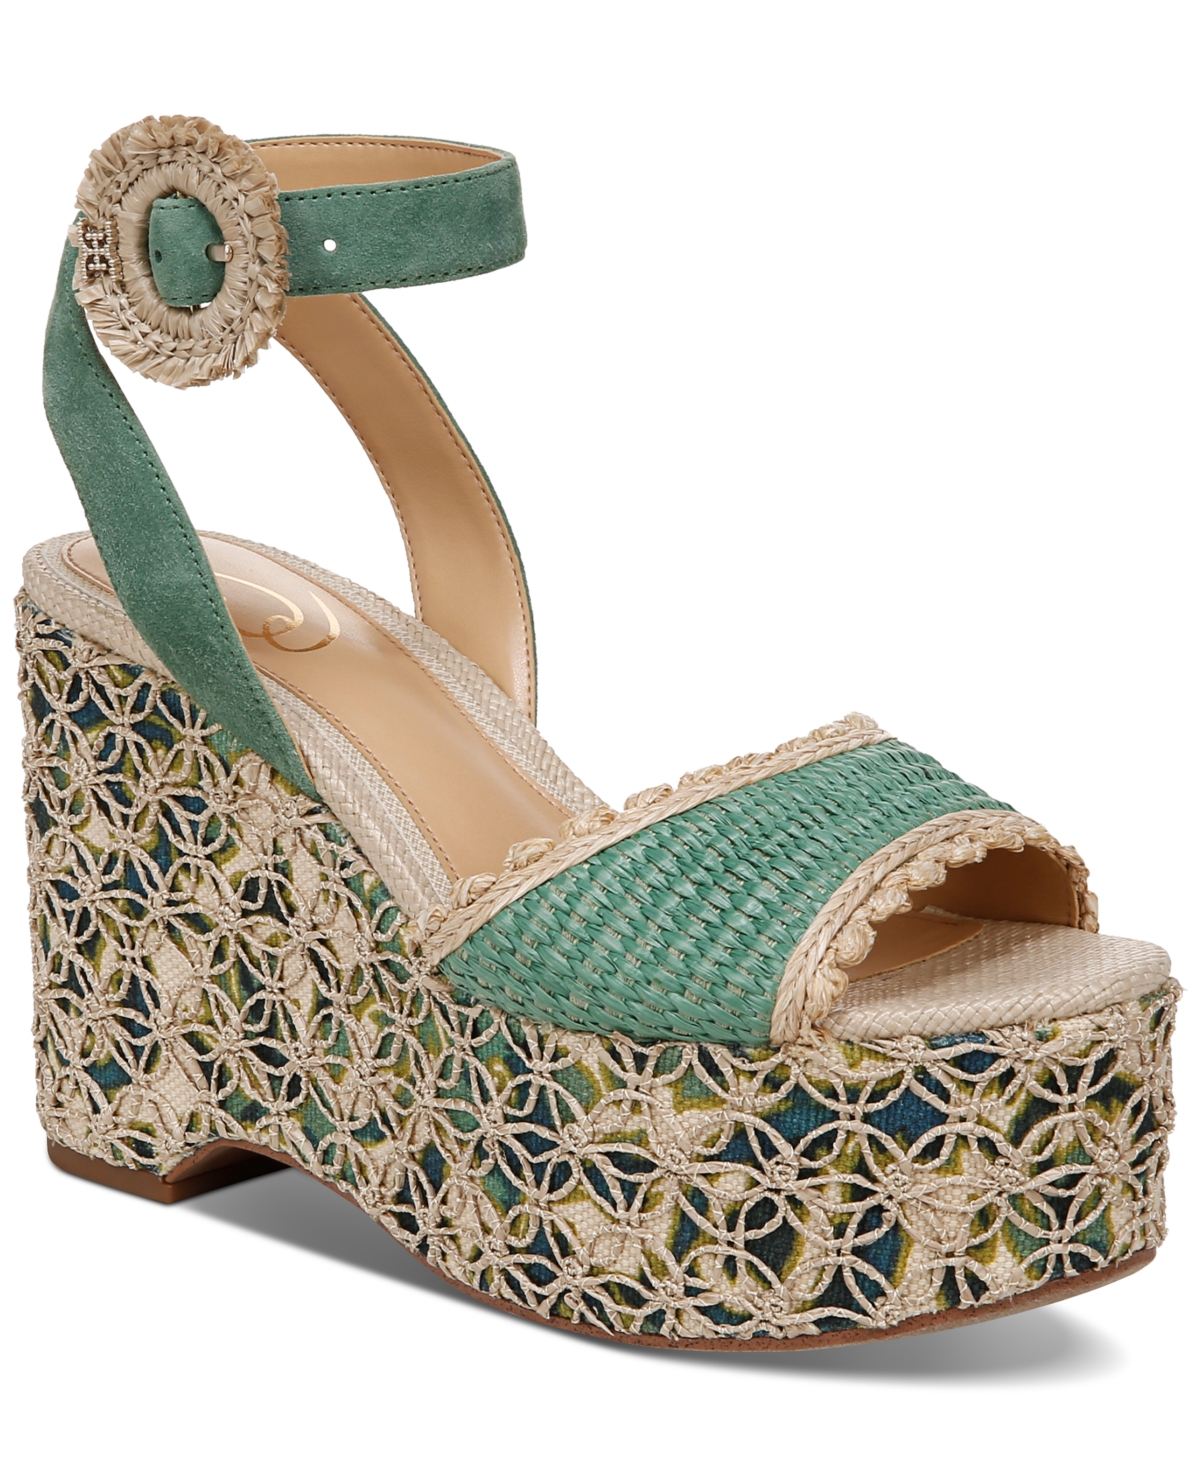 Sam Edelman Women's Amber Two-piece Sculpted Platform Wedge Sandals In Turquoise Green